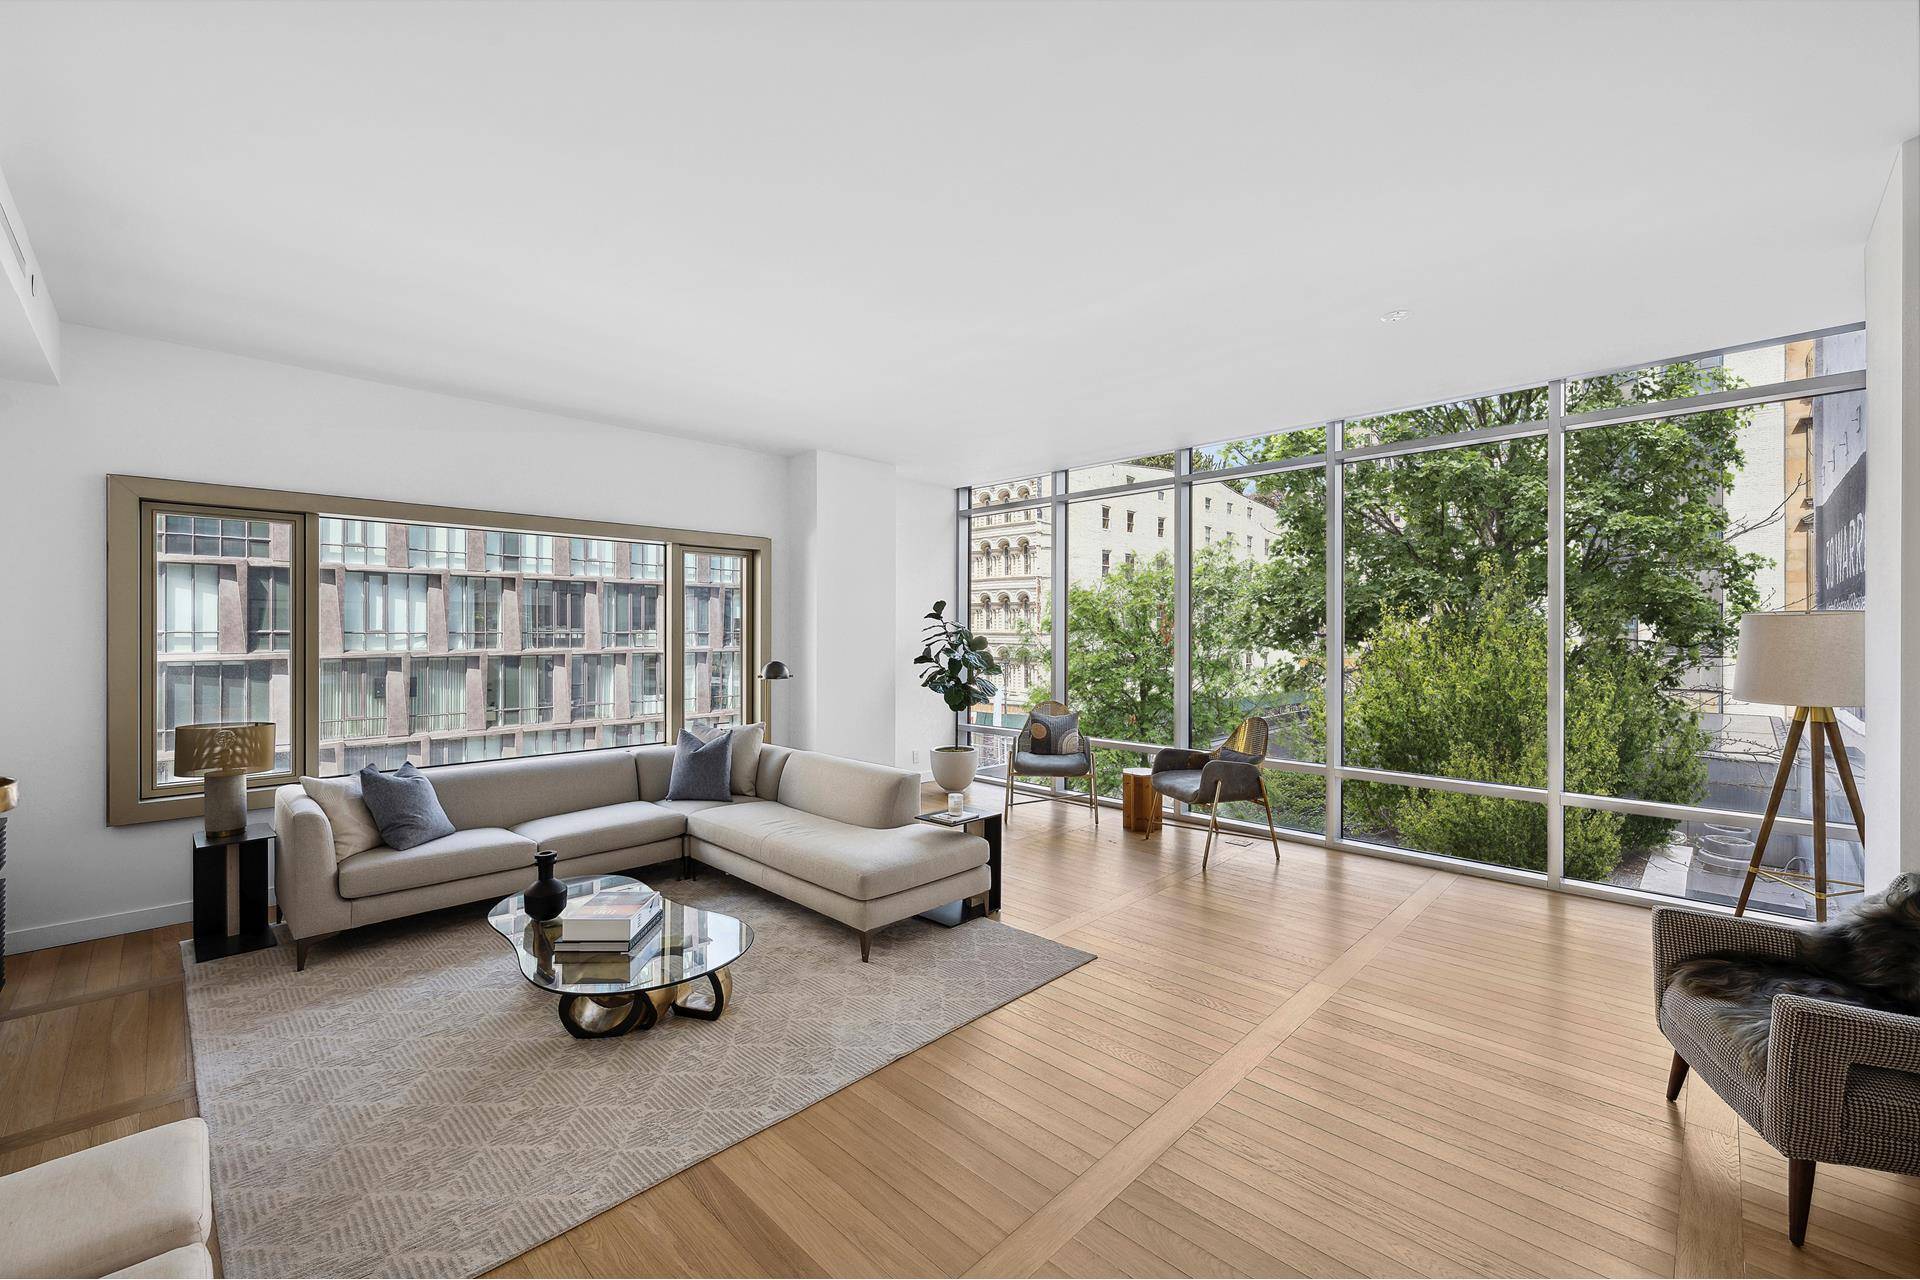 Enjoy the quintessential downtown lifestyle in a luxurious Tribeca condo, featuring views of the city skyline and lush greenery.